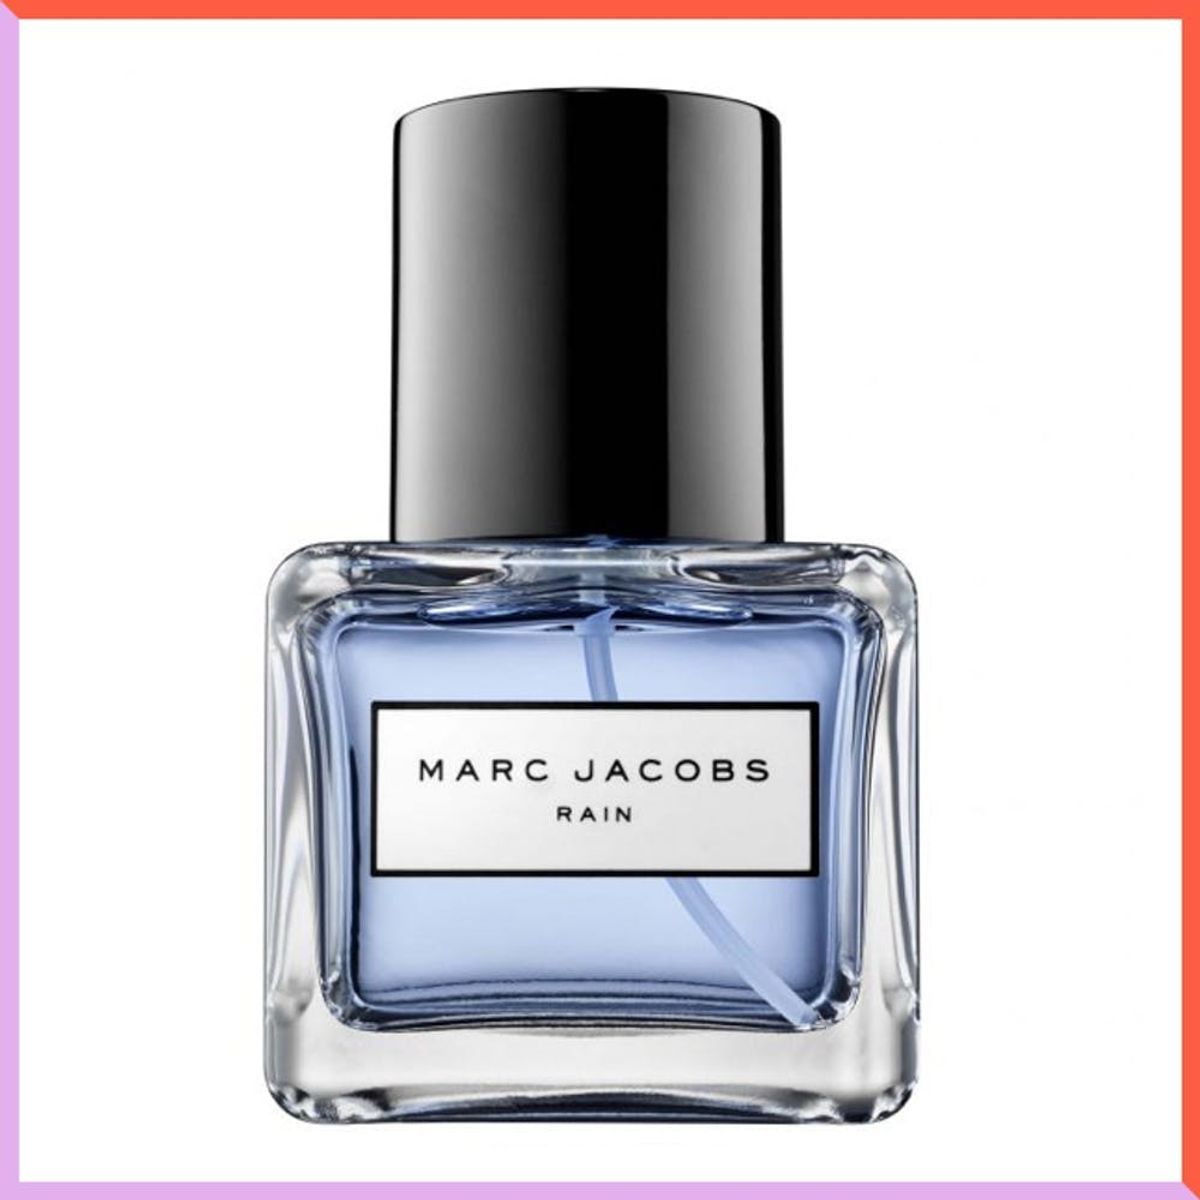 What Perfume You Should Buy According to Your New Year’s Resolution